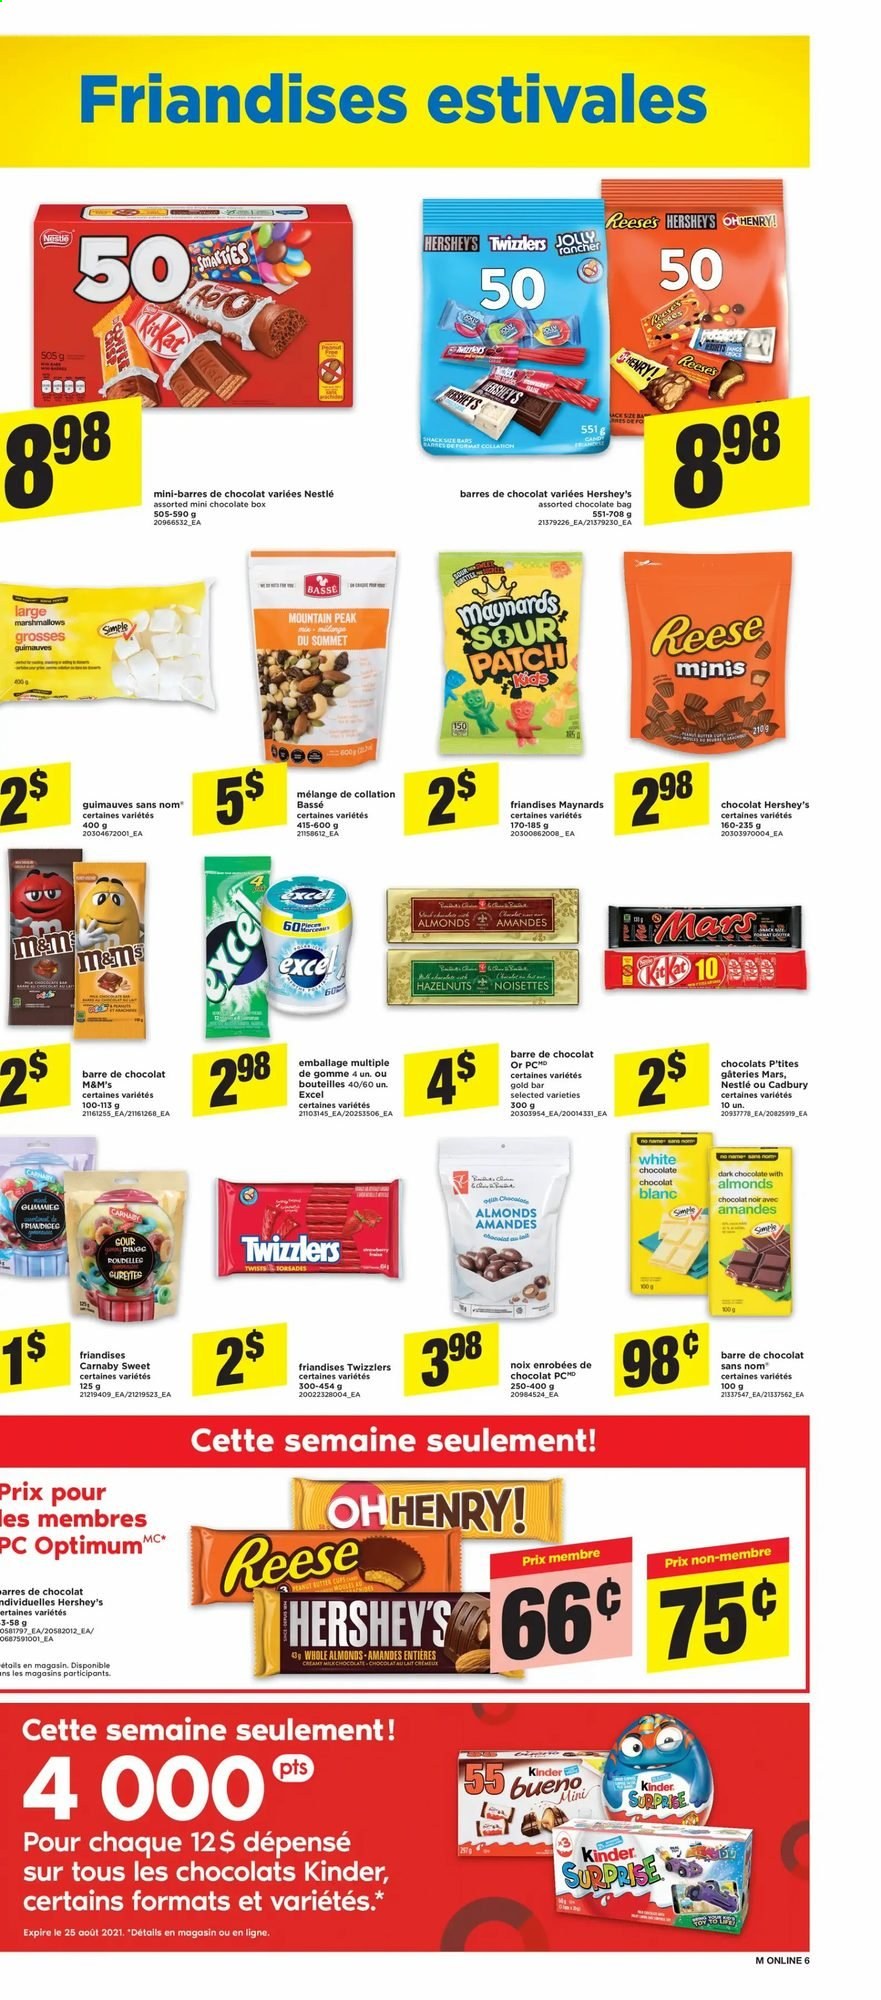 thumbnail - Maxi Flyer - August 19, 2021 - August 25, 2021 - Sales products - Reese's, Hershey's, marshmallows, white chocolate, chocolate, Mars, Kinder Bueno, dark chocolate, Cadbury, Sour Patch, almonds, hazelnuts, Nestlé, M&M's. Page 11.